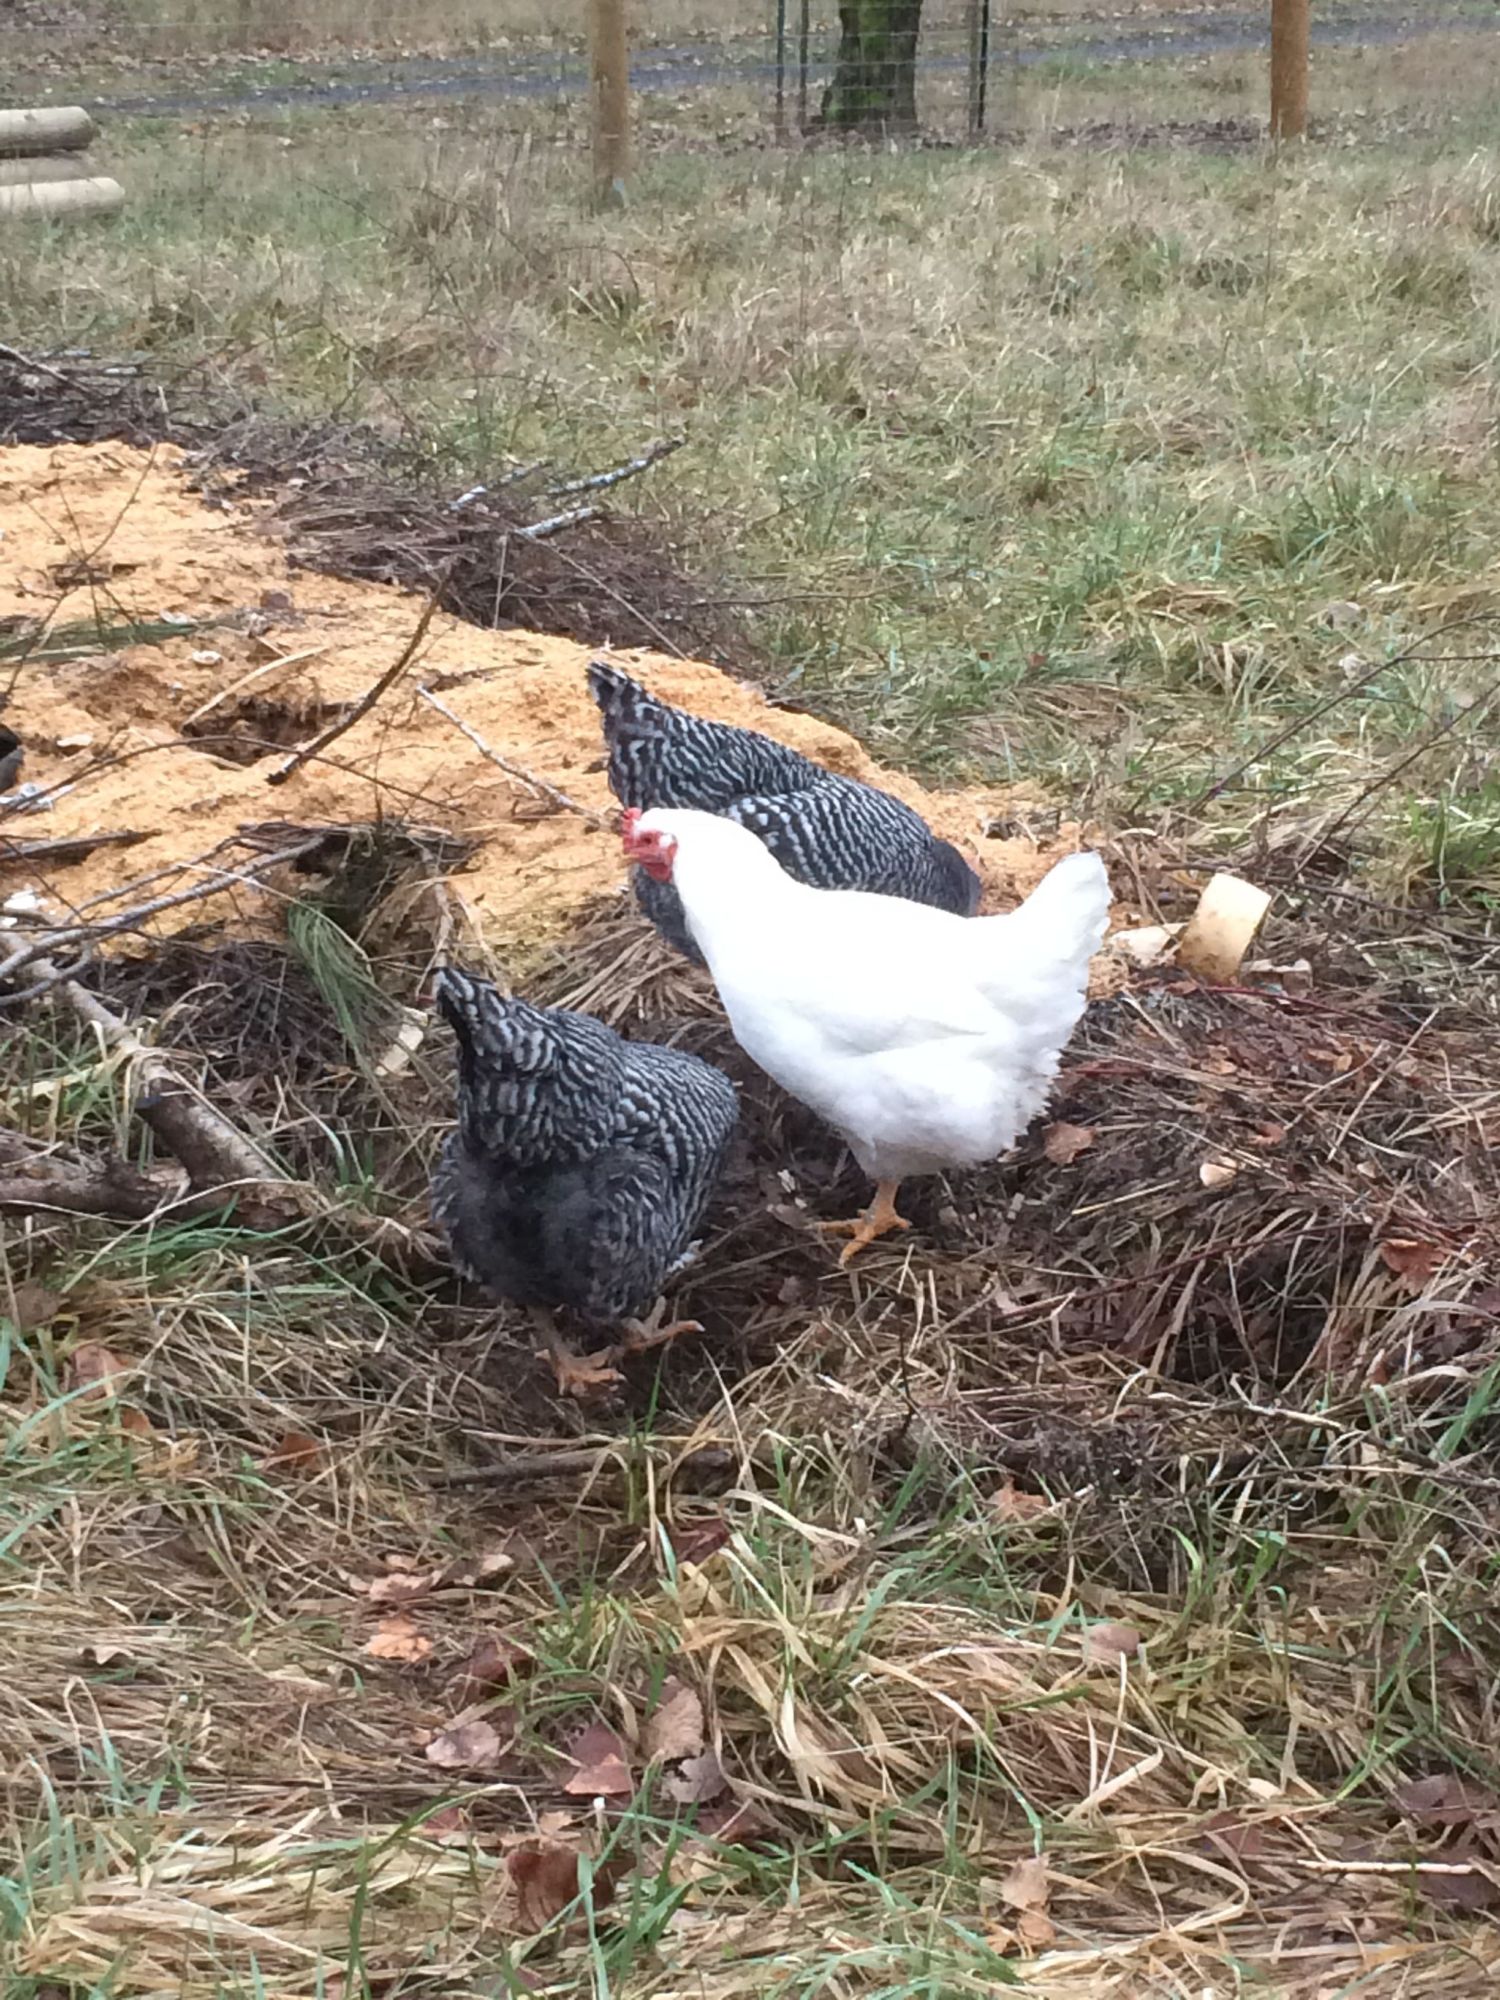 ~compost pile
~hens: You(barred rock), Ostrich(barred rock), Pee(white rock)